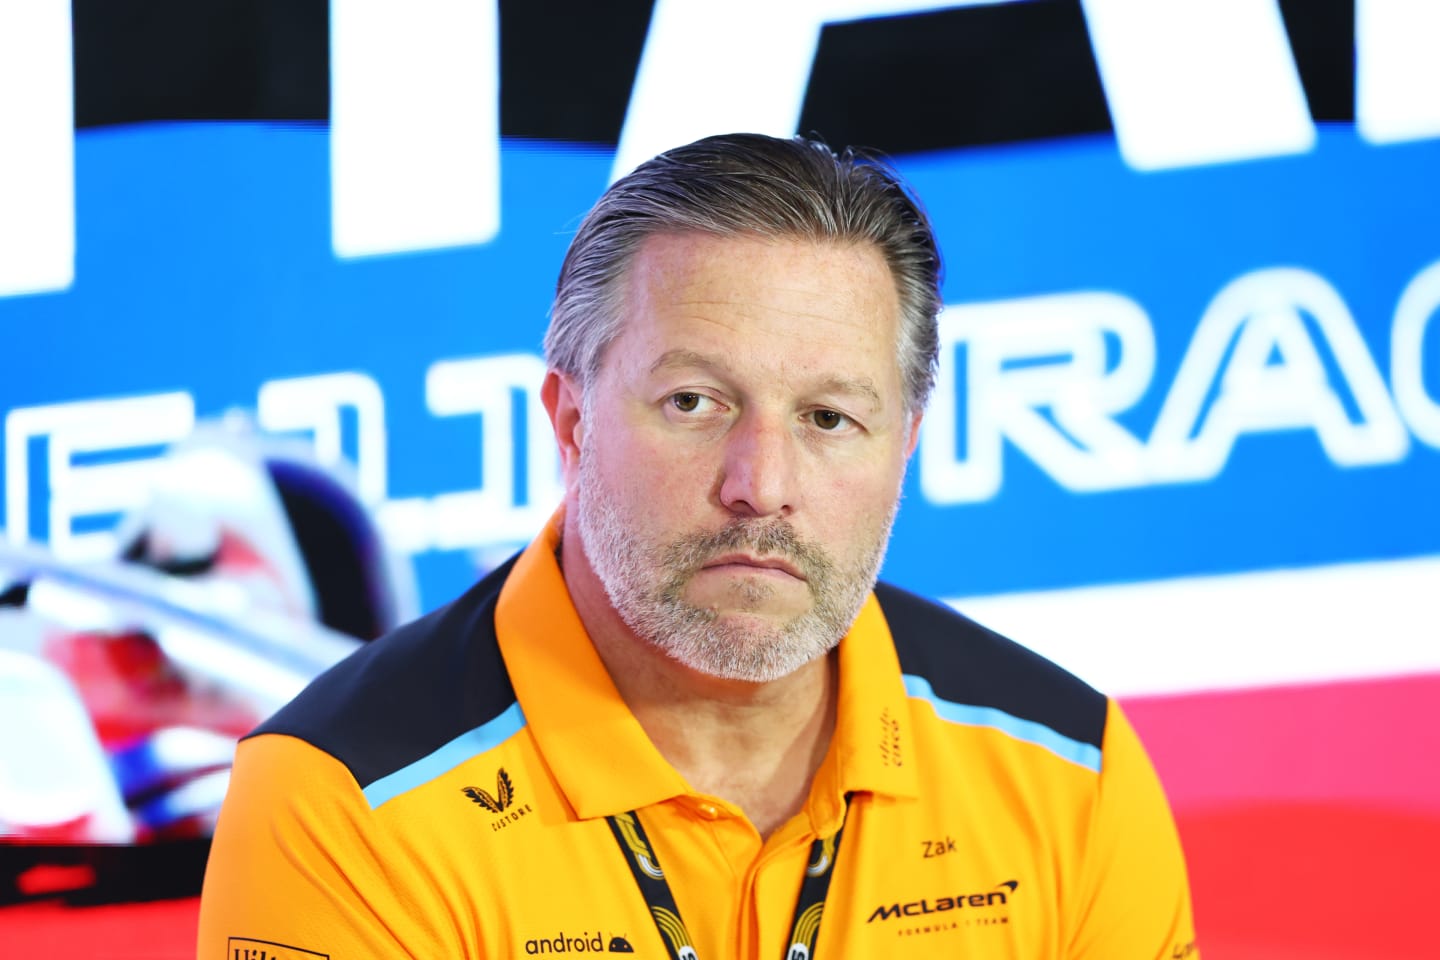 NORTHAMPTON, ENGLAND - JULY 07: McLaren Chief Executive Officer Zak Brown attends the Team